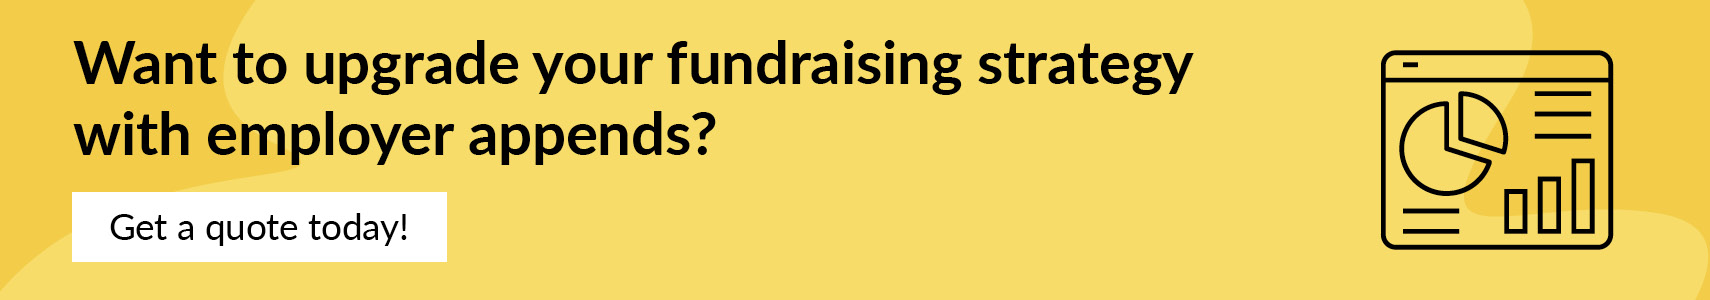 Click to get a quote so you can upgrade your fundraising strategy with employer appends.